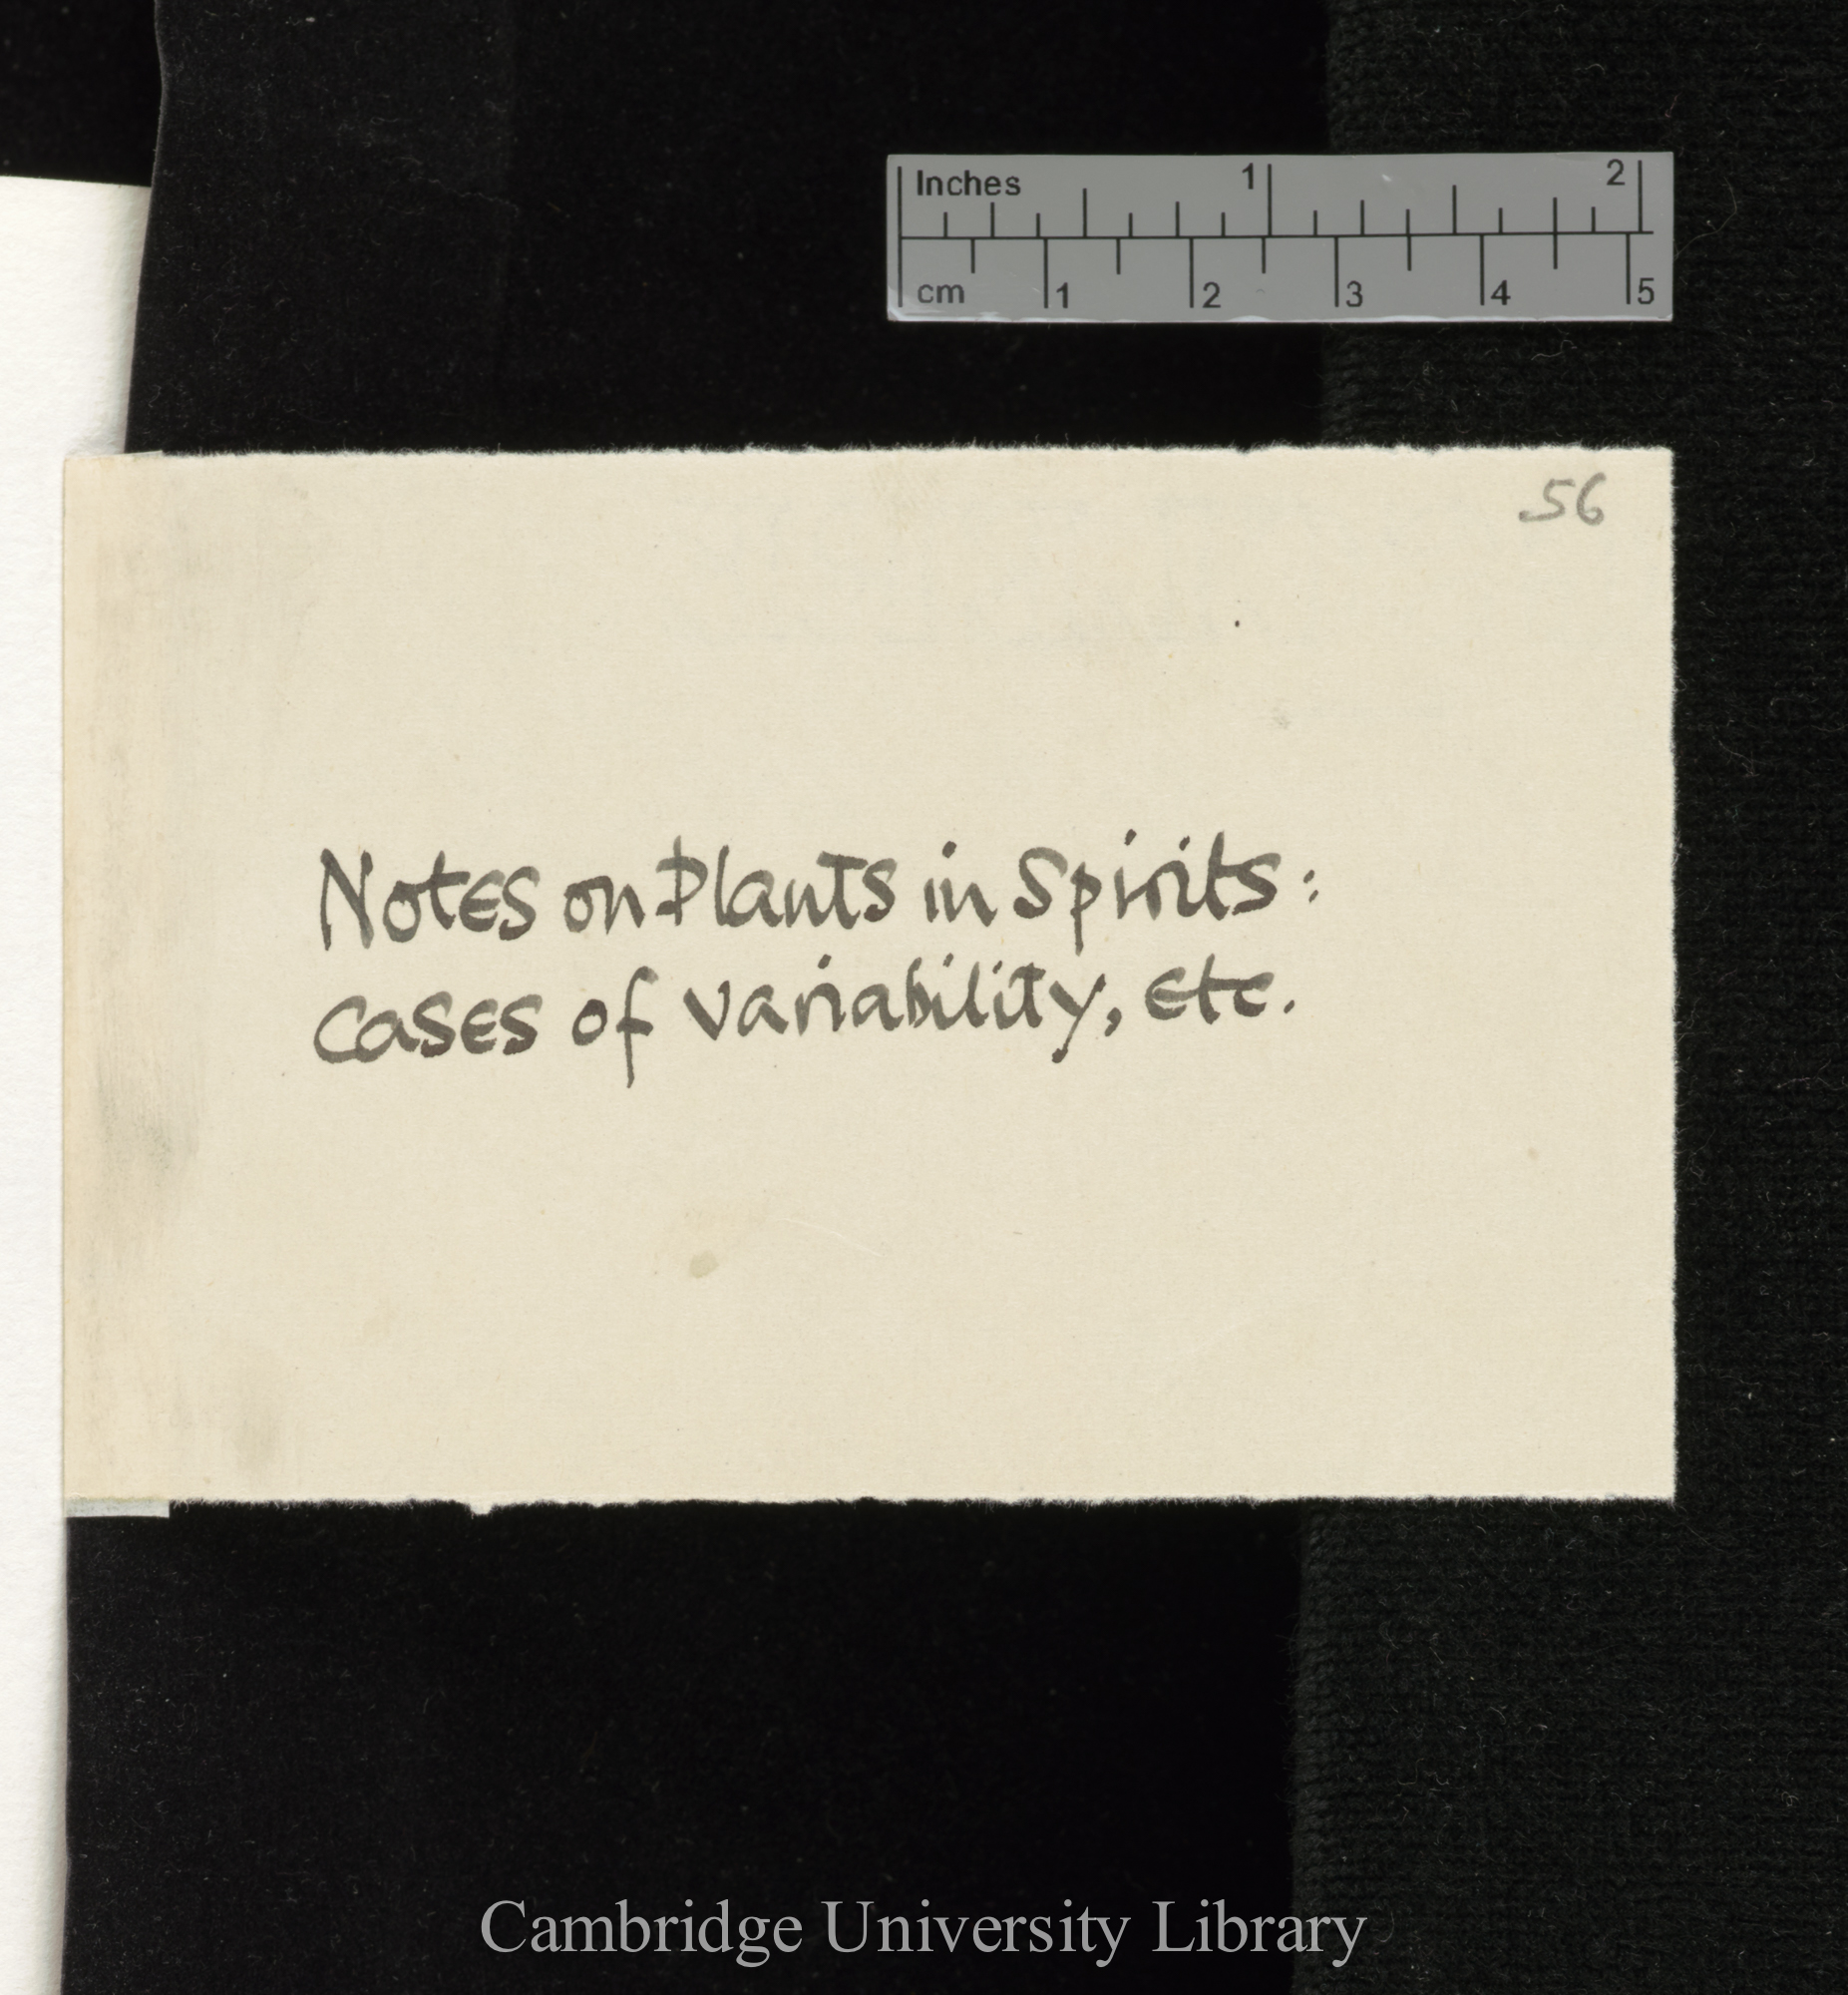 wrapper for items DAR 107: 57- annotated &#39;Notes on Plants in Spirits cases of variability etc&#39;